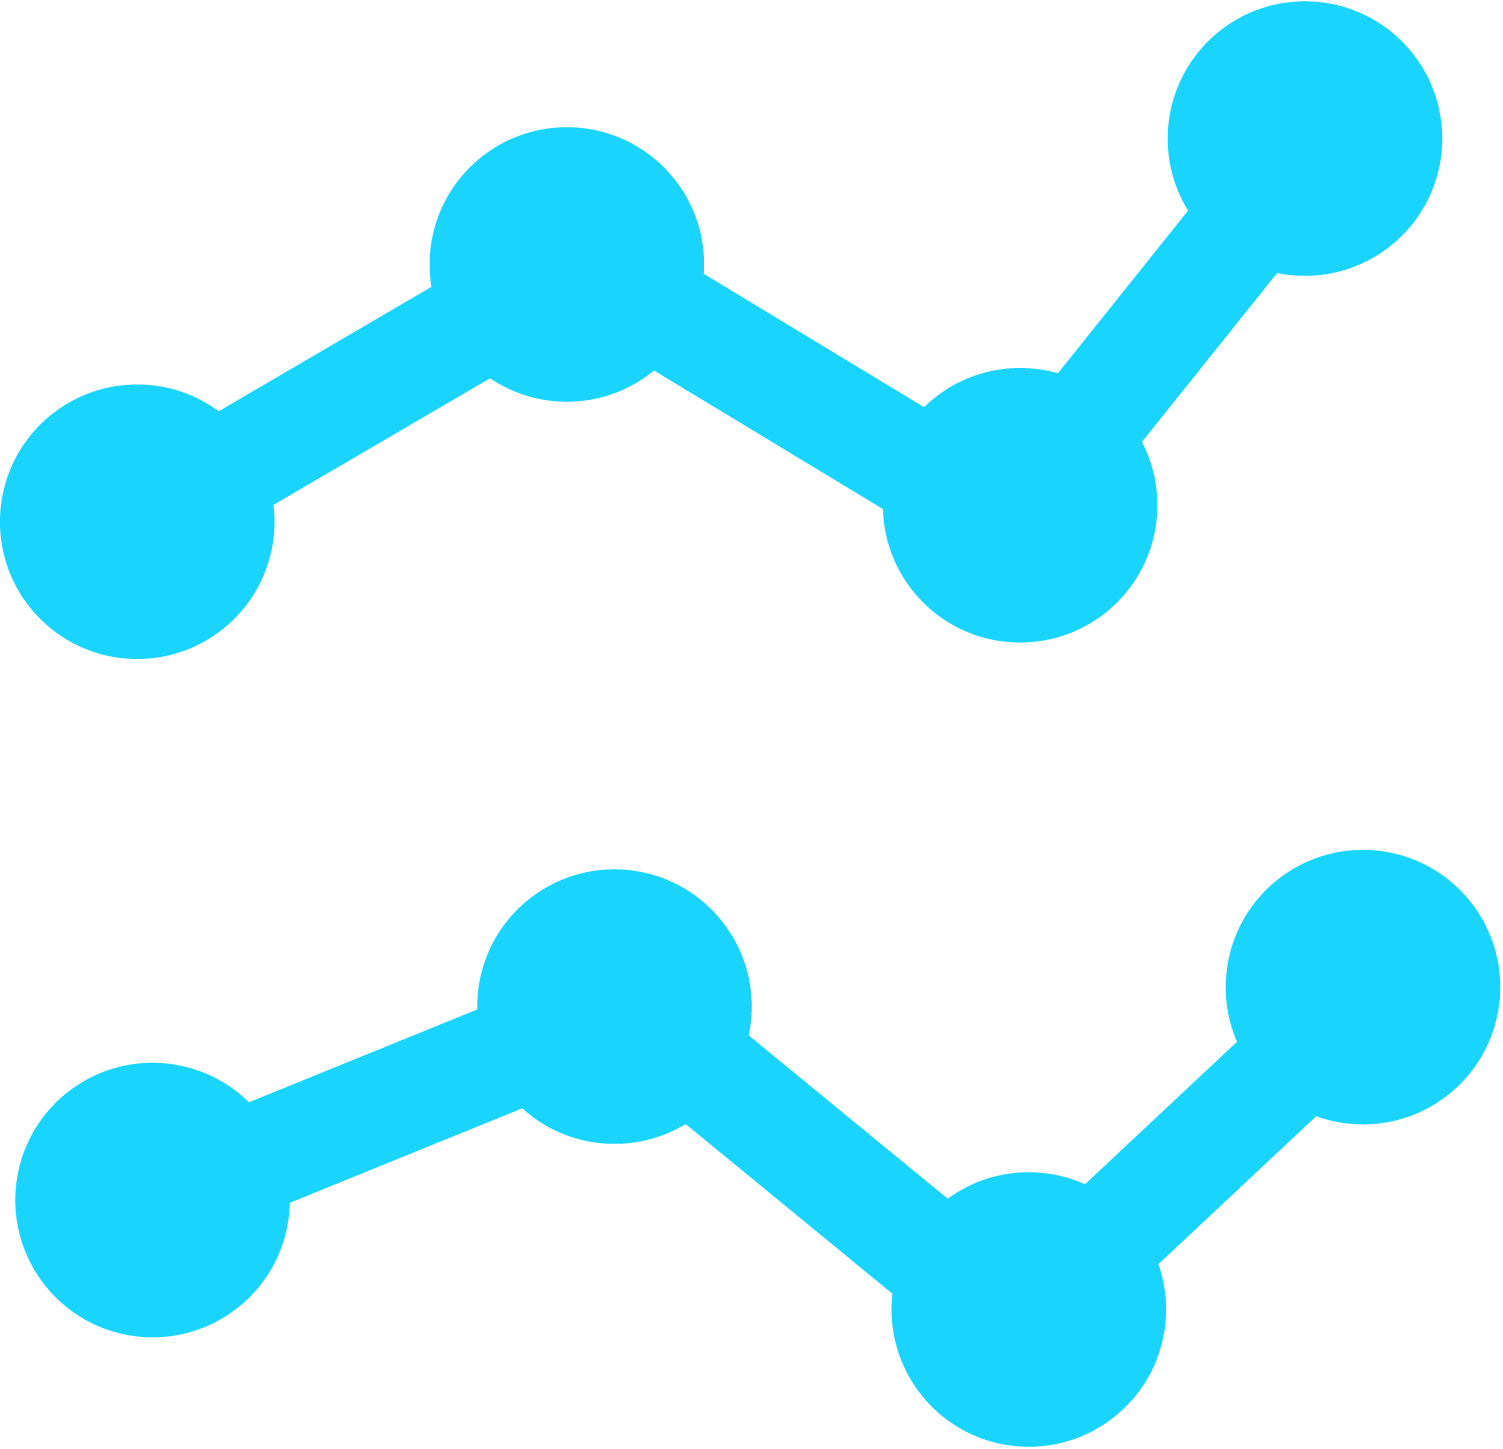 Two parallel line graphs in bright blue, each consisting of four connected circles, illustrate data trends with upward fluctuations at different points. Set against a black background, these visually striking graphs highlight the Emfit and Fibion metrics effectively.